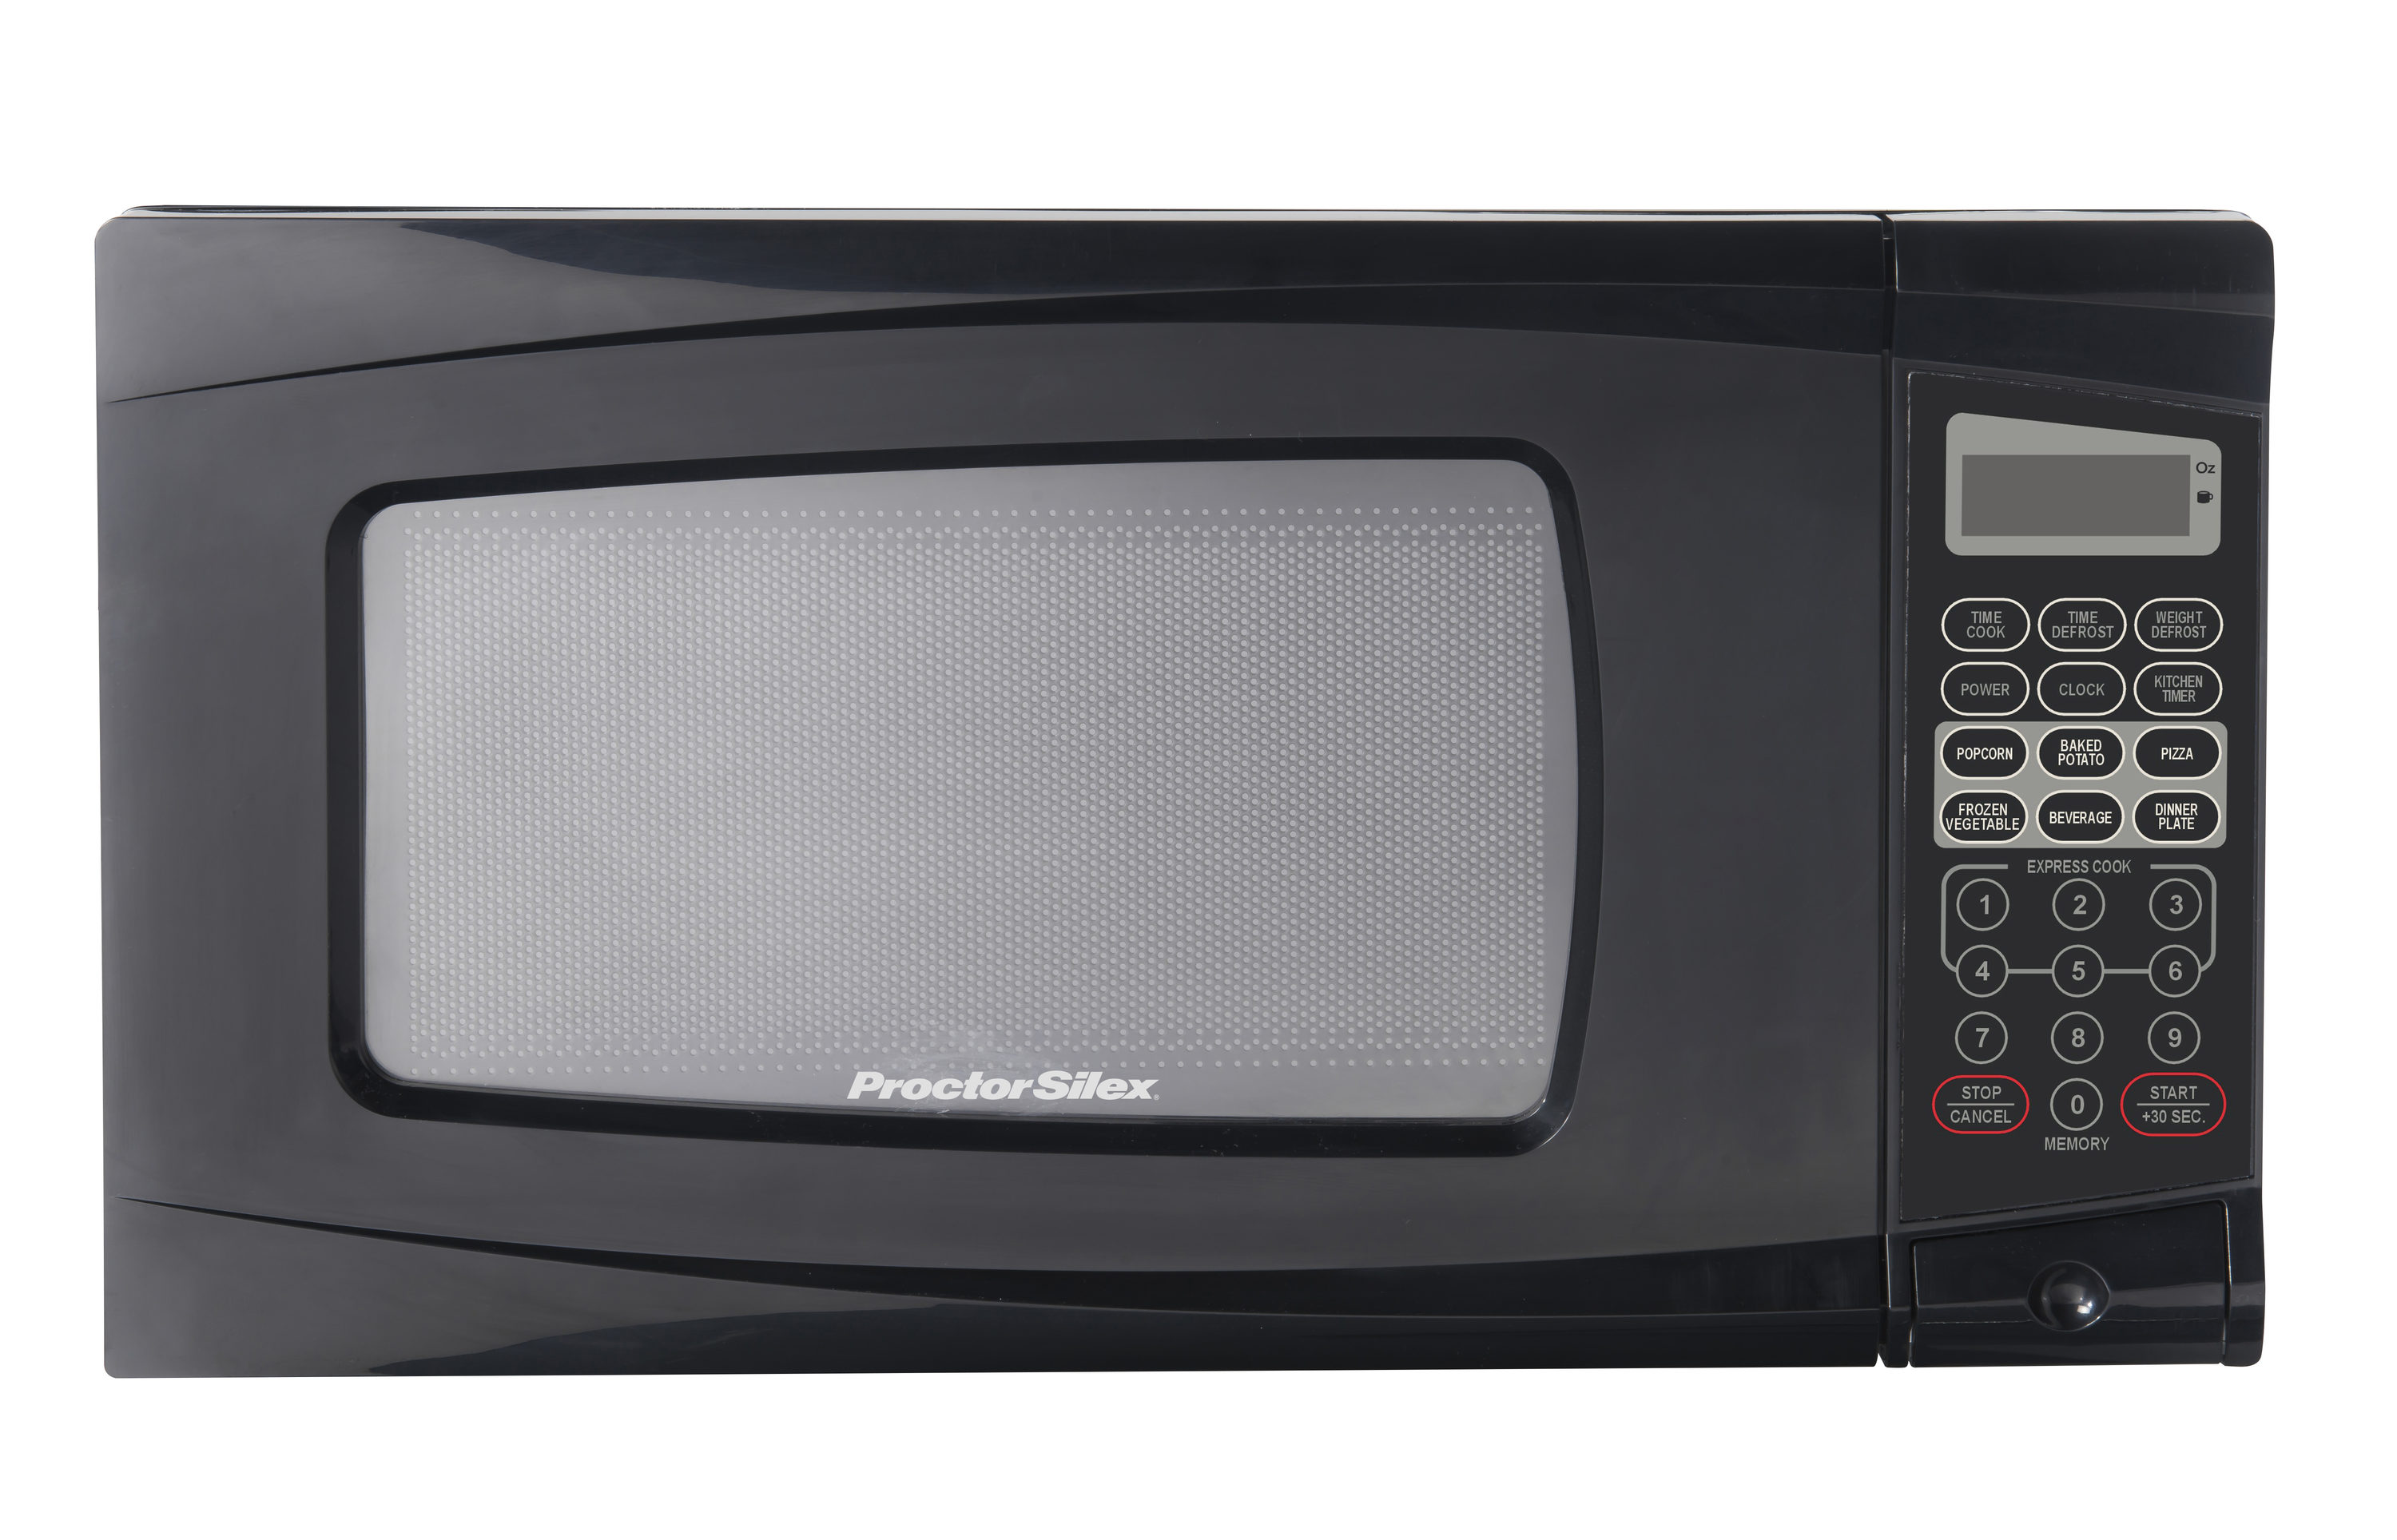 How to Set Clock on Proctor Silex Microwave: Quick Guide